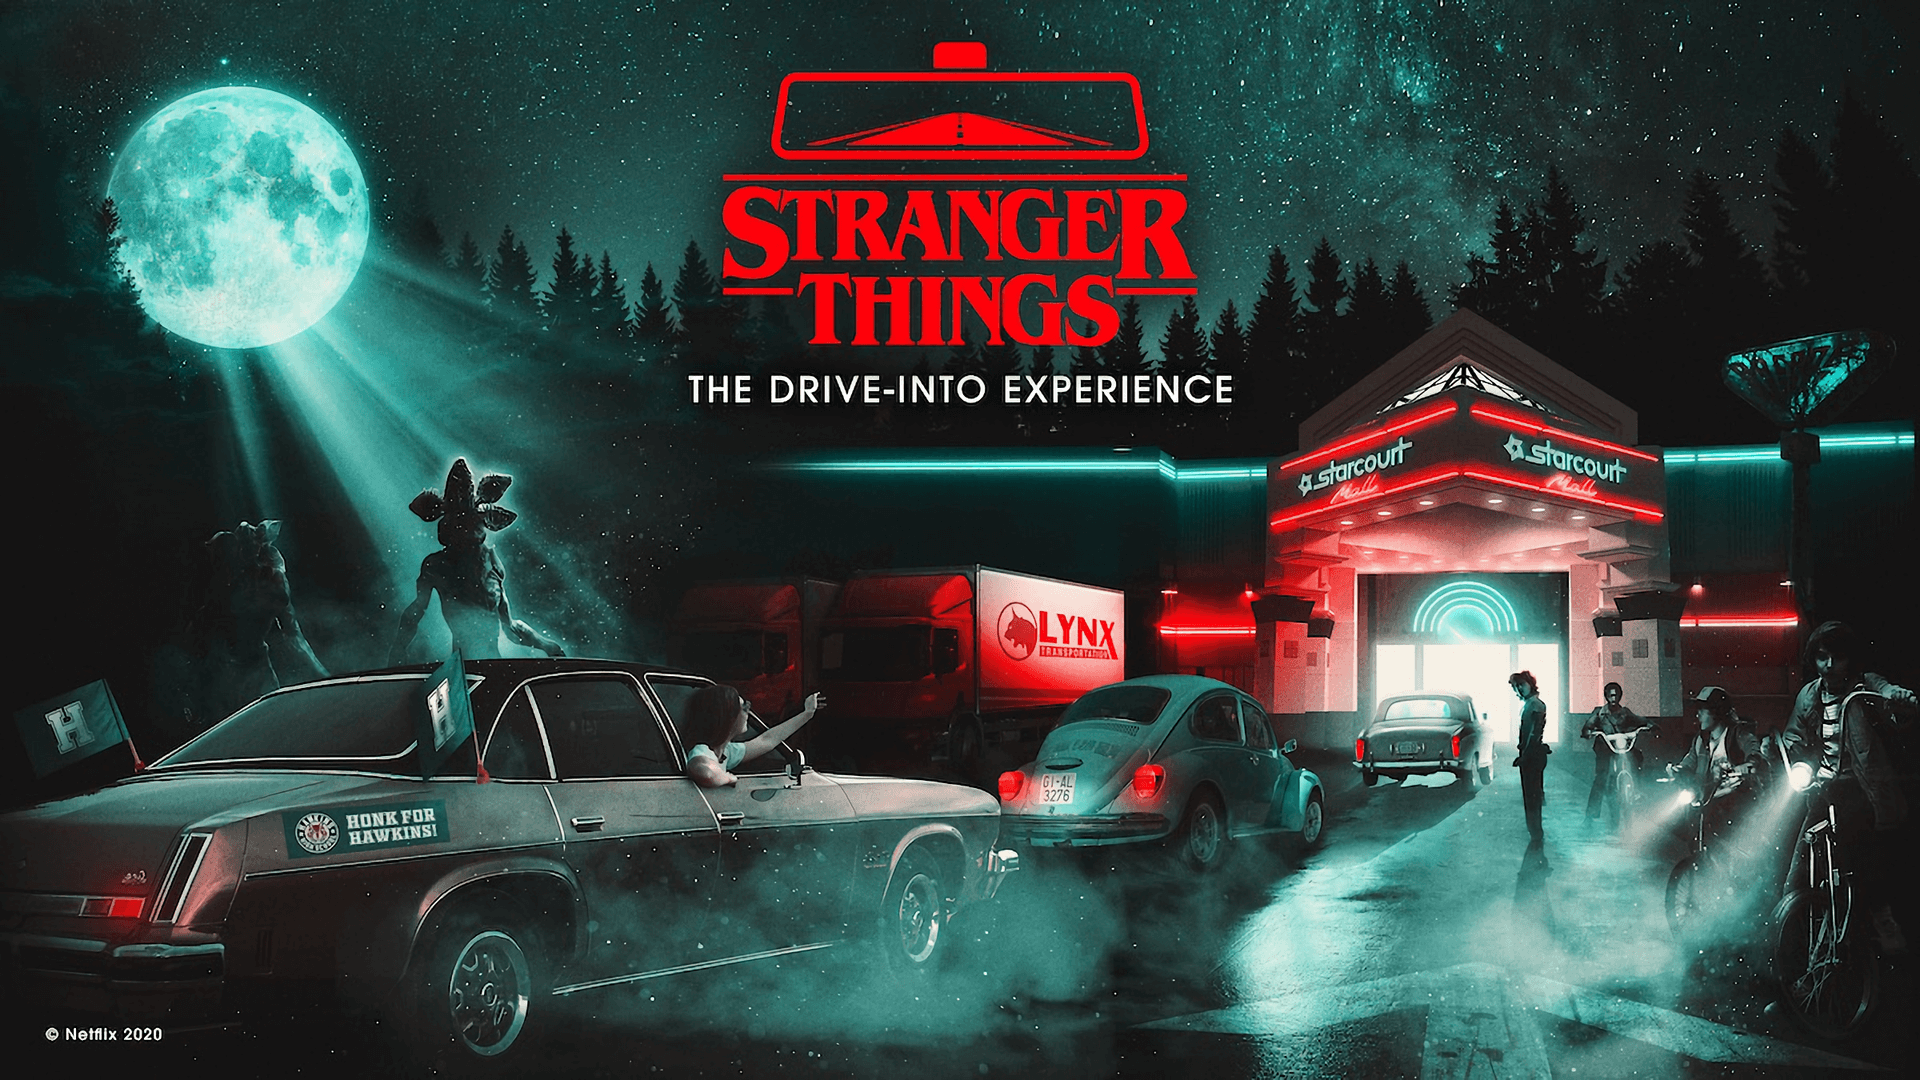 Netflix is putting on a drive-into Stranger Things experience in LA later this year